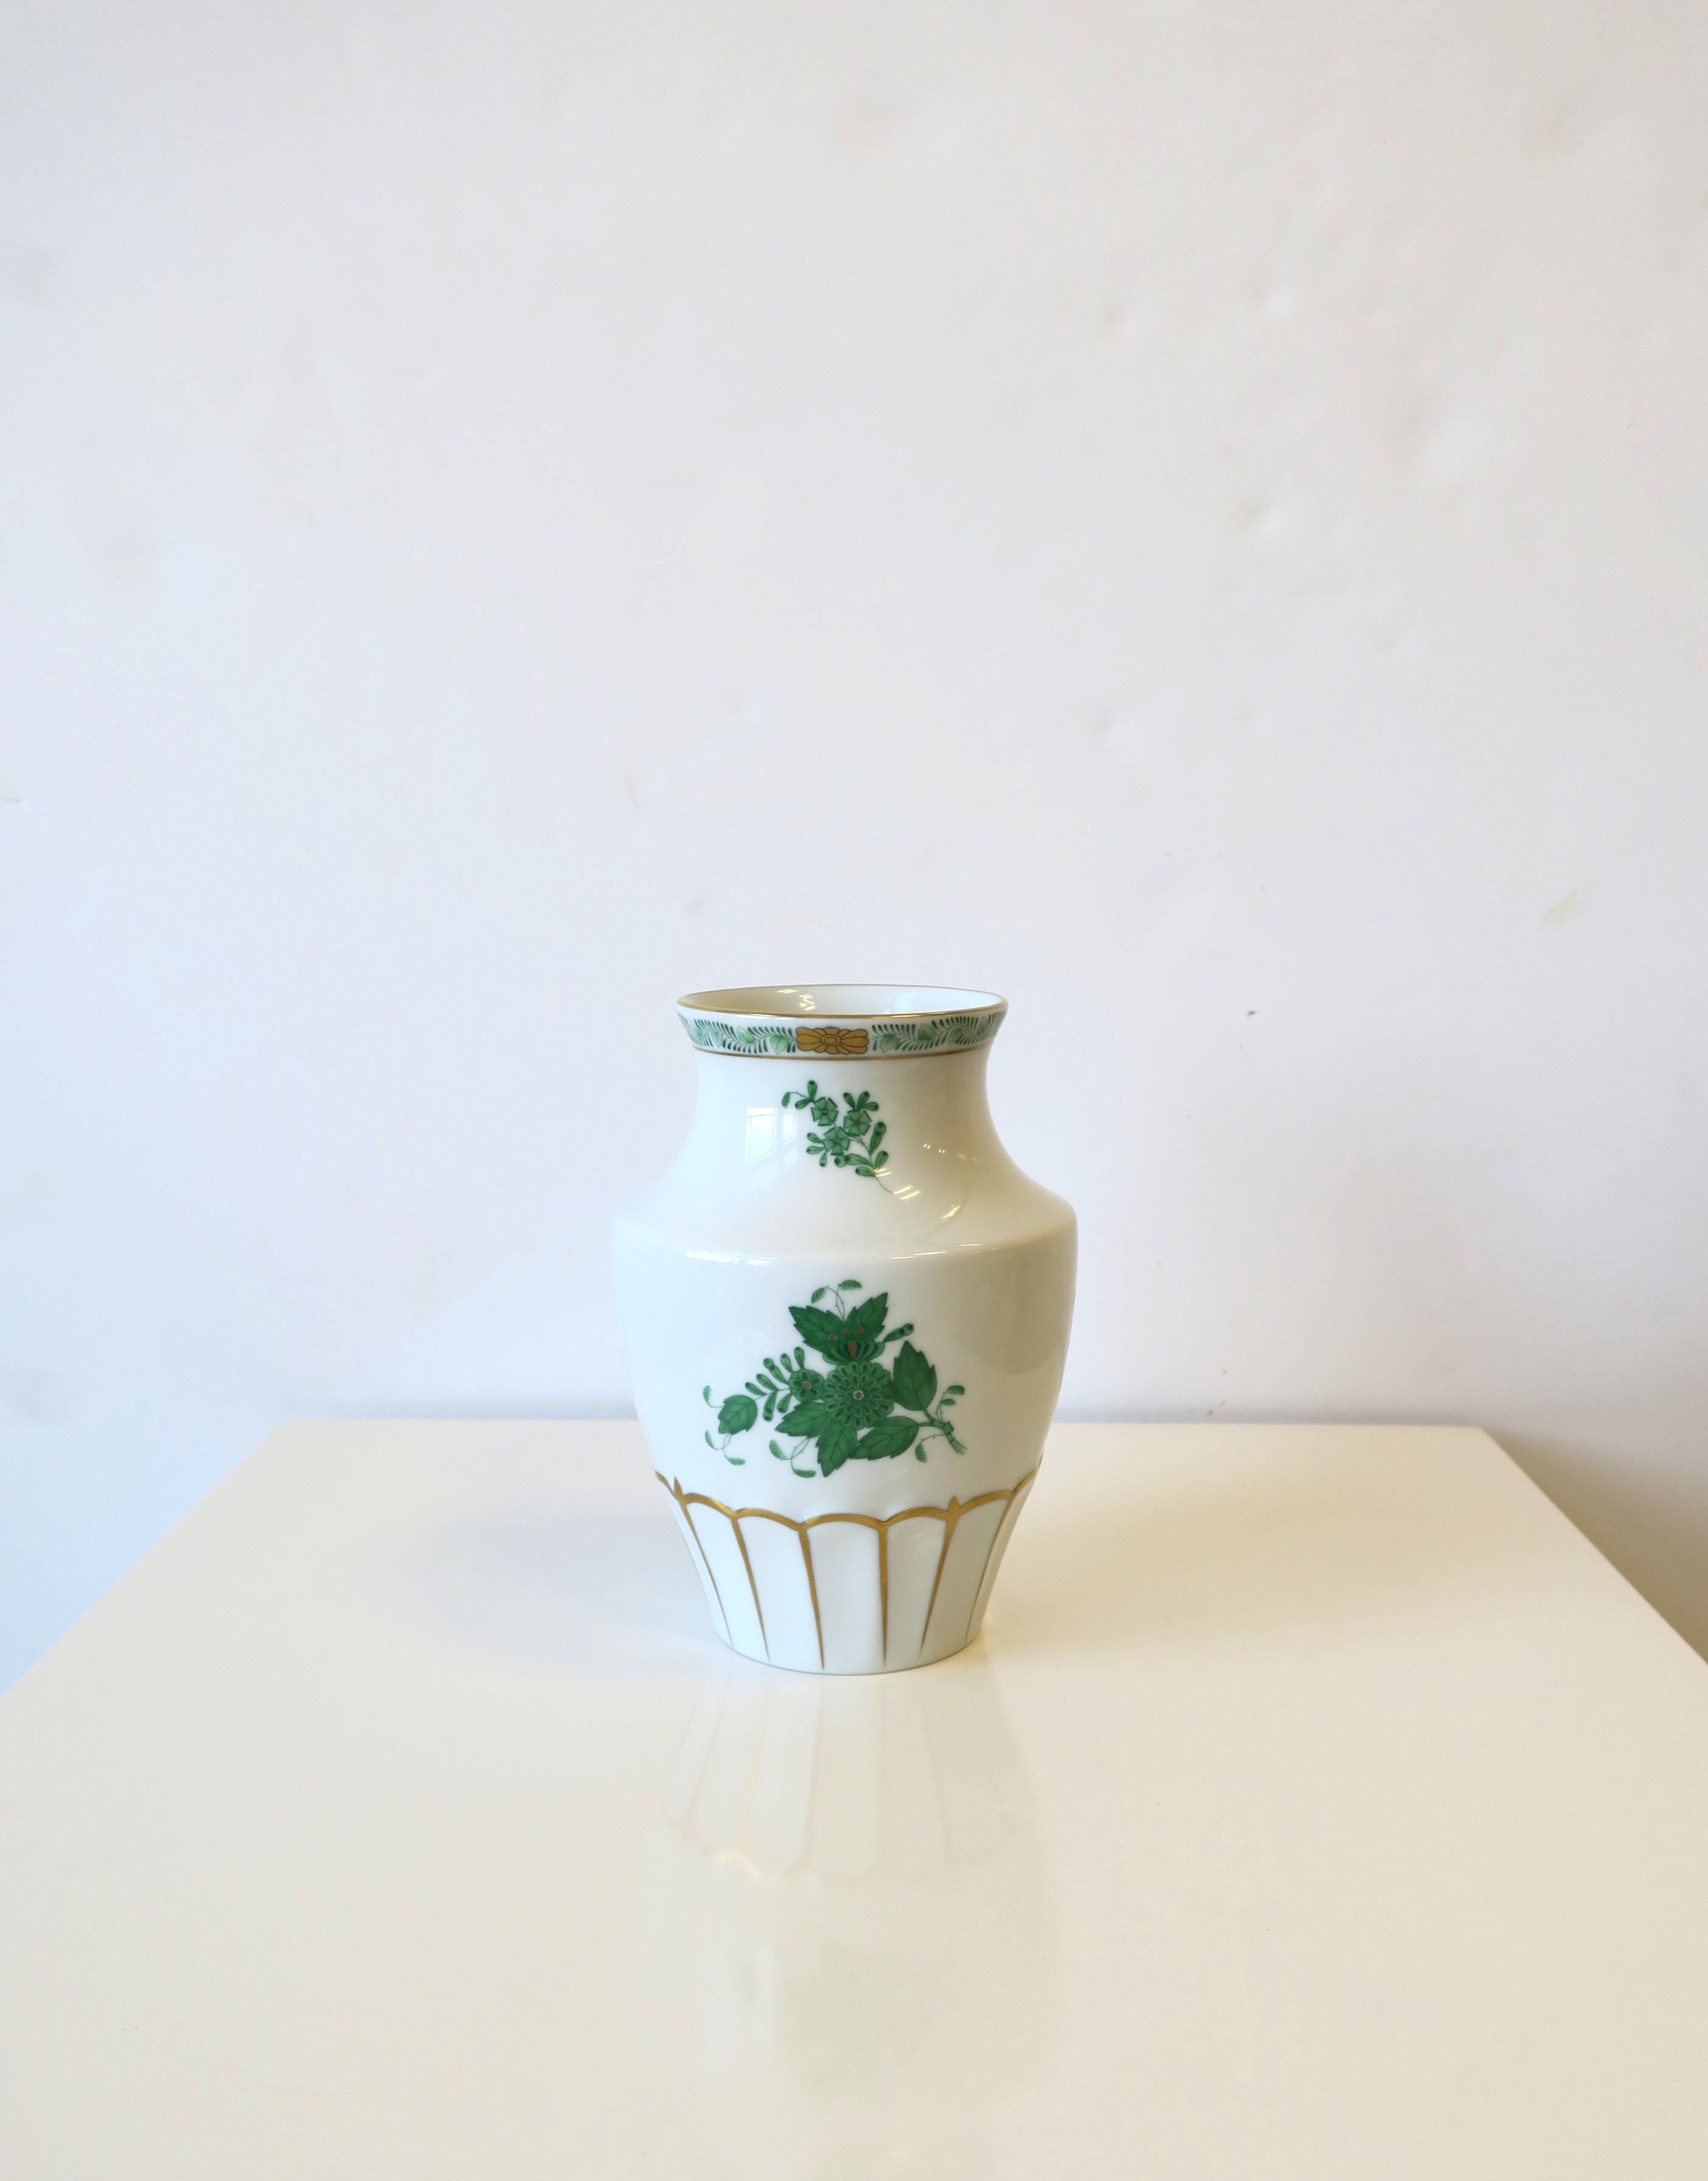 A beautiful white porcelain hand painted vase from luxury maker HEREND, Hungary, circa 20th century. This Herend vase is the 